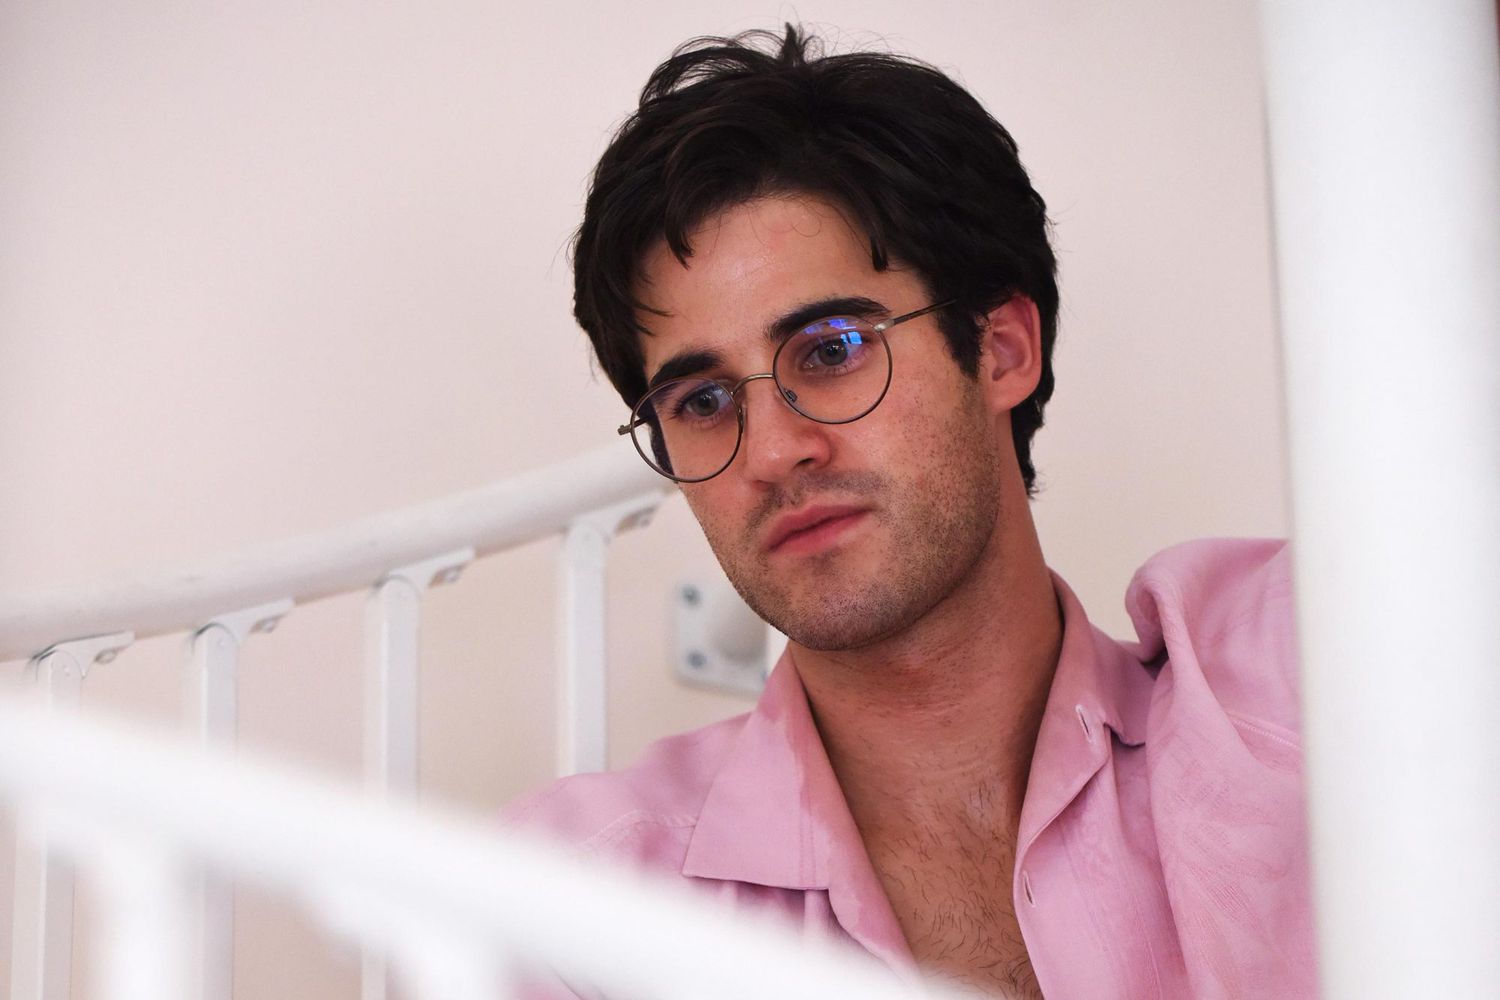 Darren Criss, Assassination of Gianni Versace, Best Actor in a Limited Series or Movie